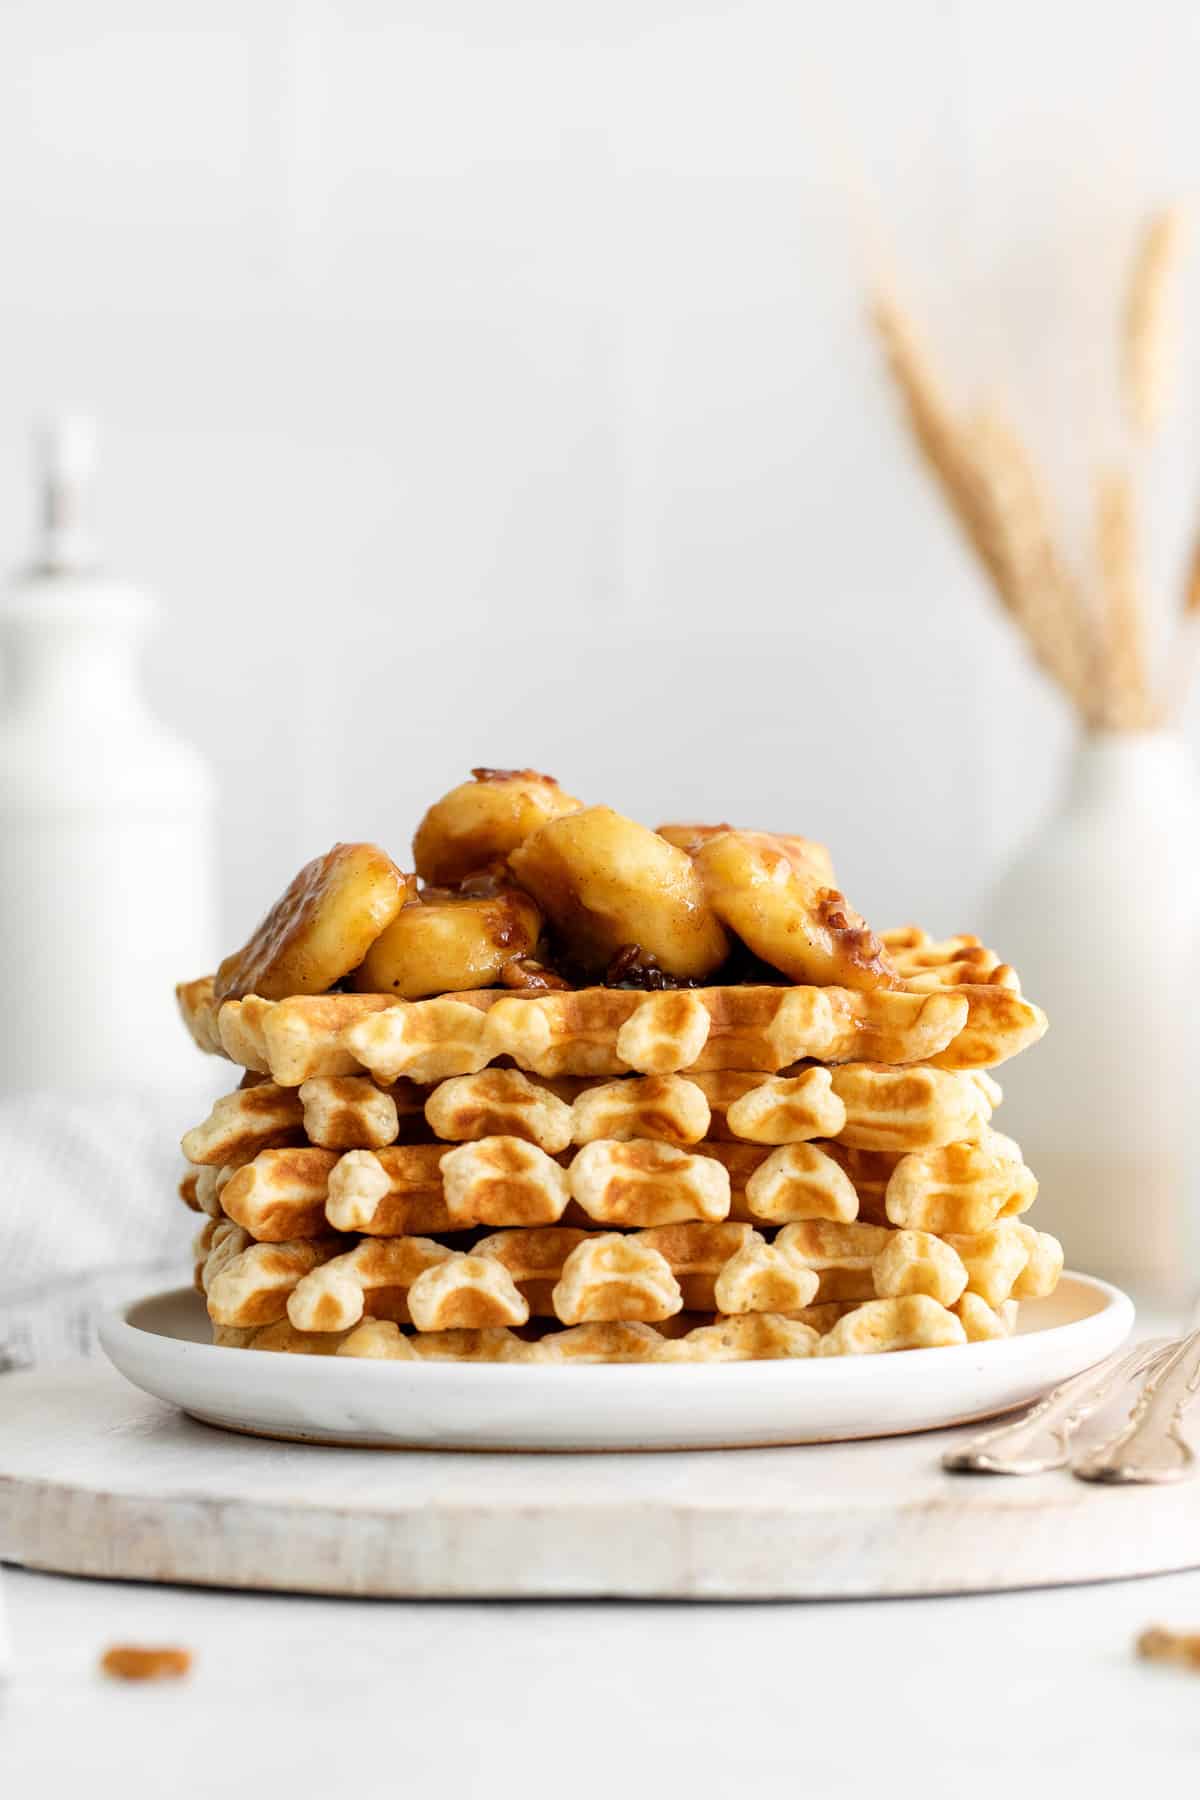 Banana topping on a stack of waffles.